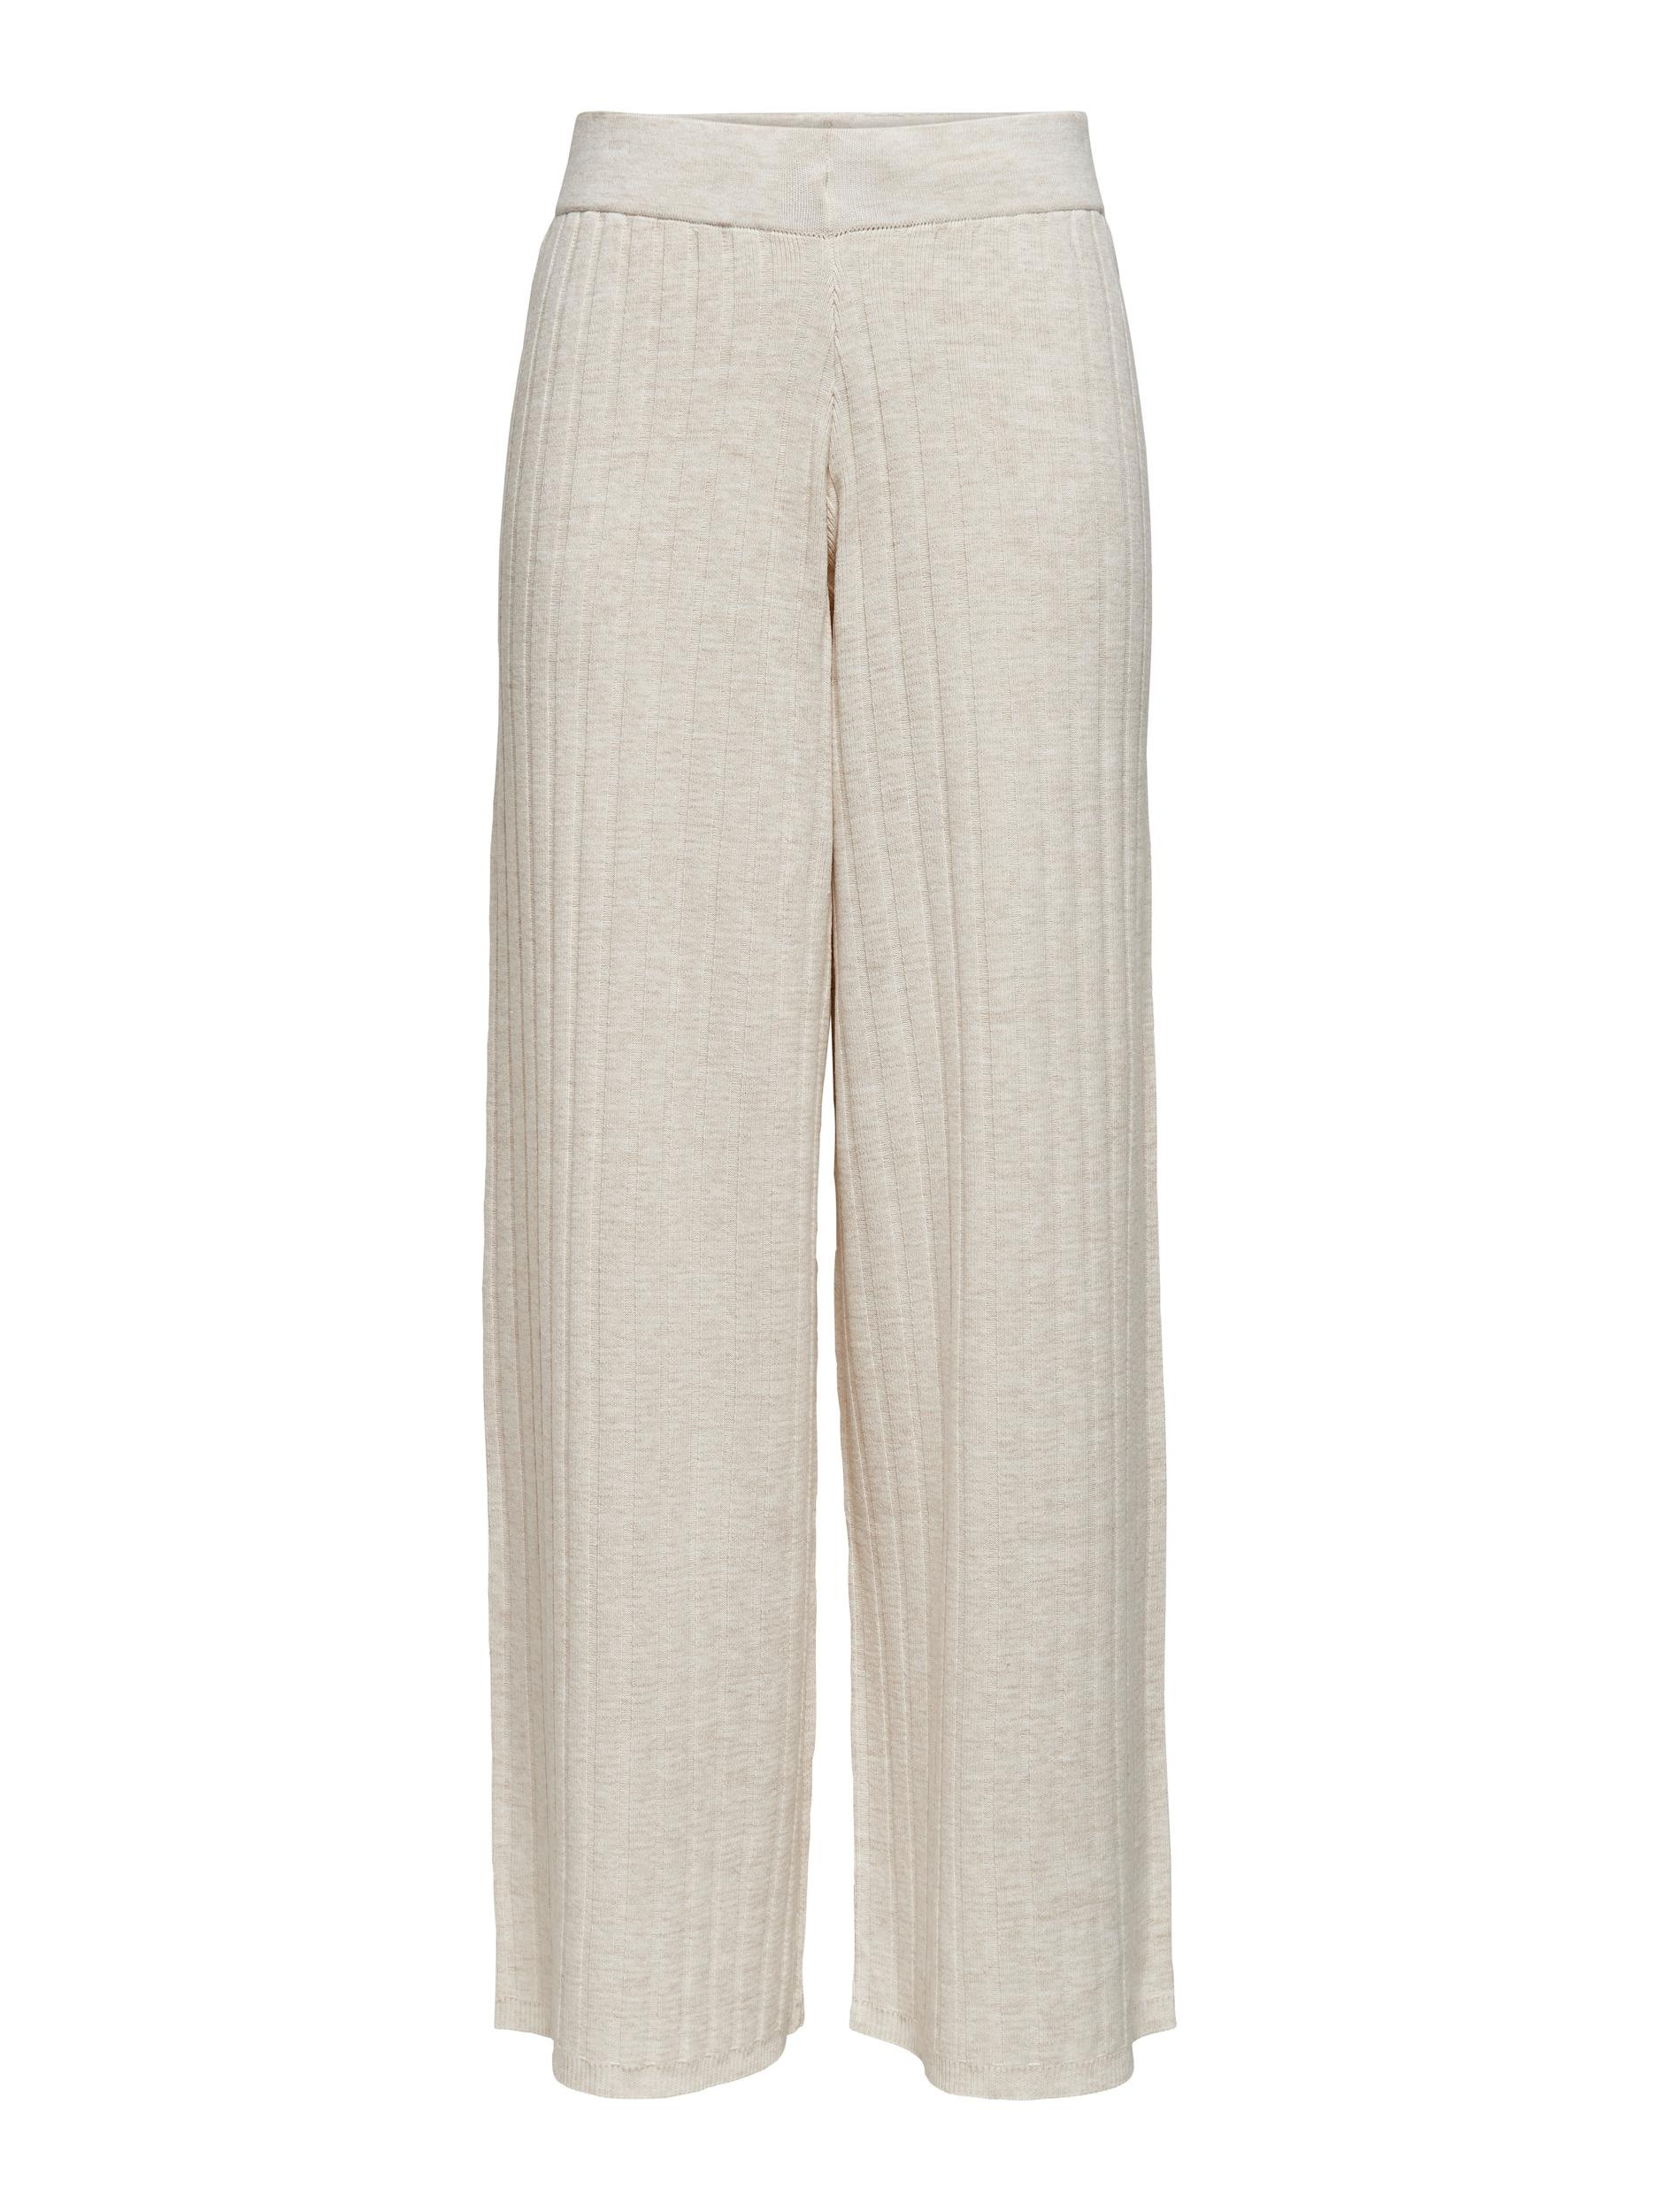 high-waisted trousers, White, large image number 0